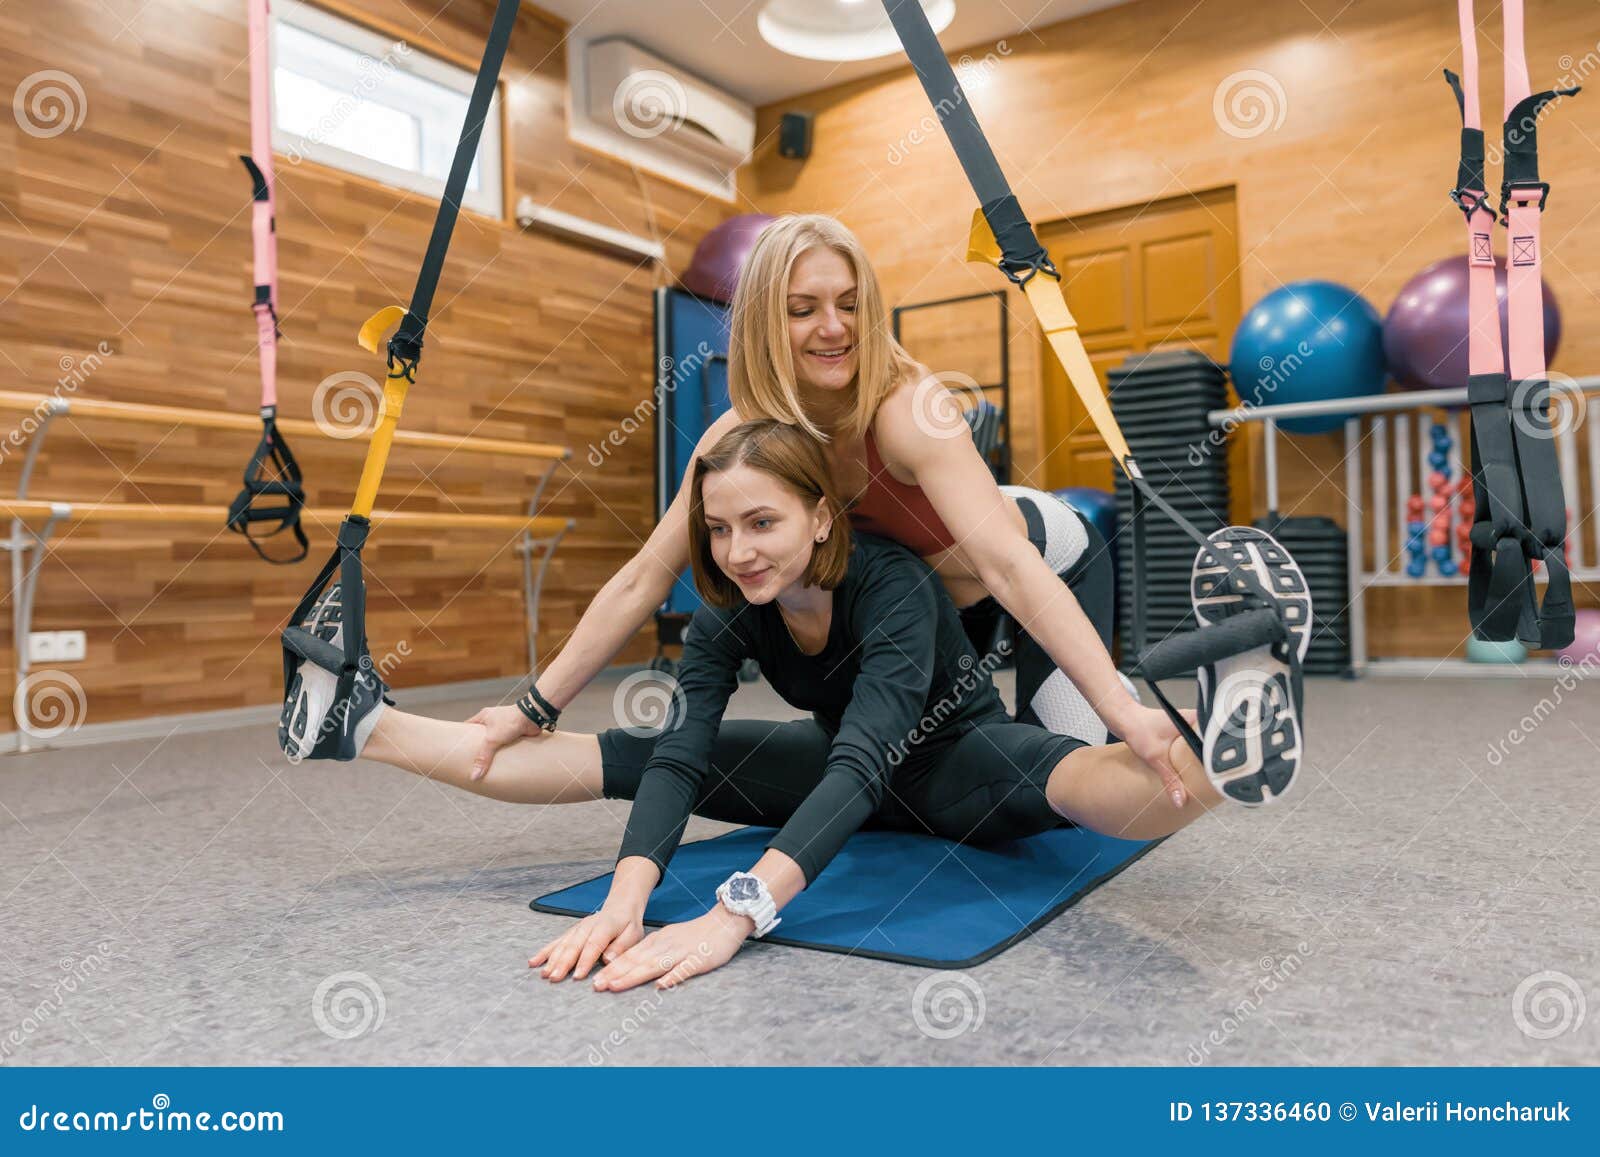 Female Personal Fitness Instructor Helping Young Girl To Do Exercis